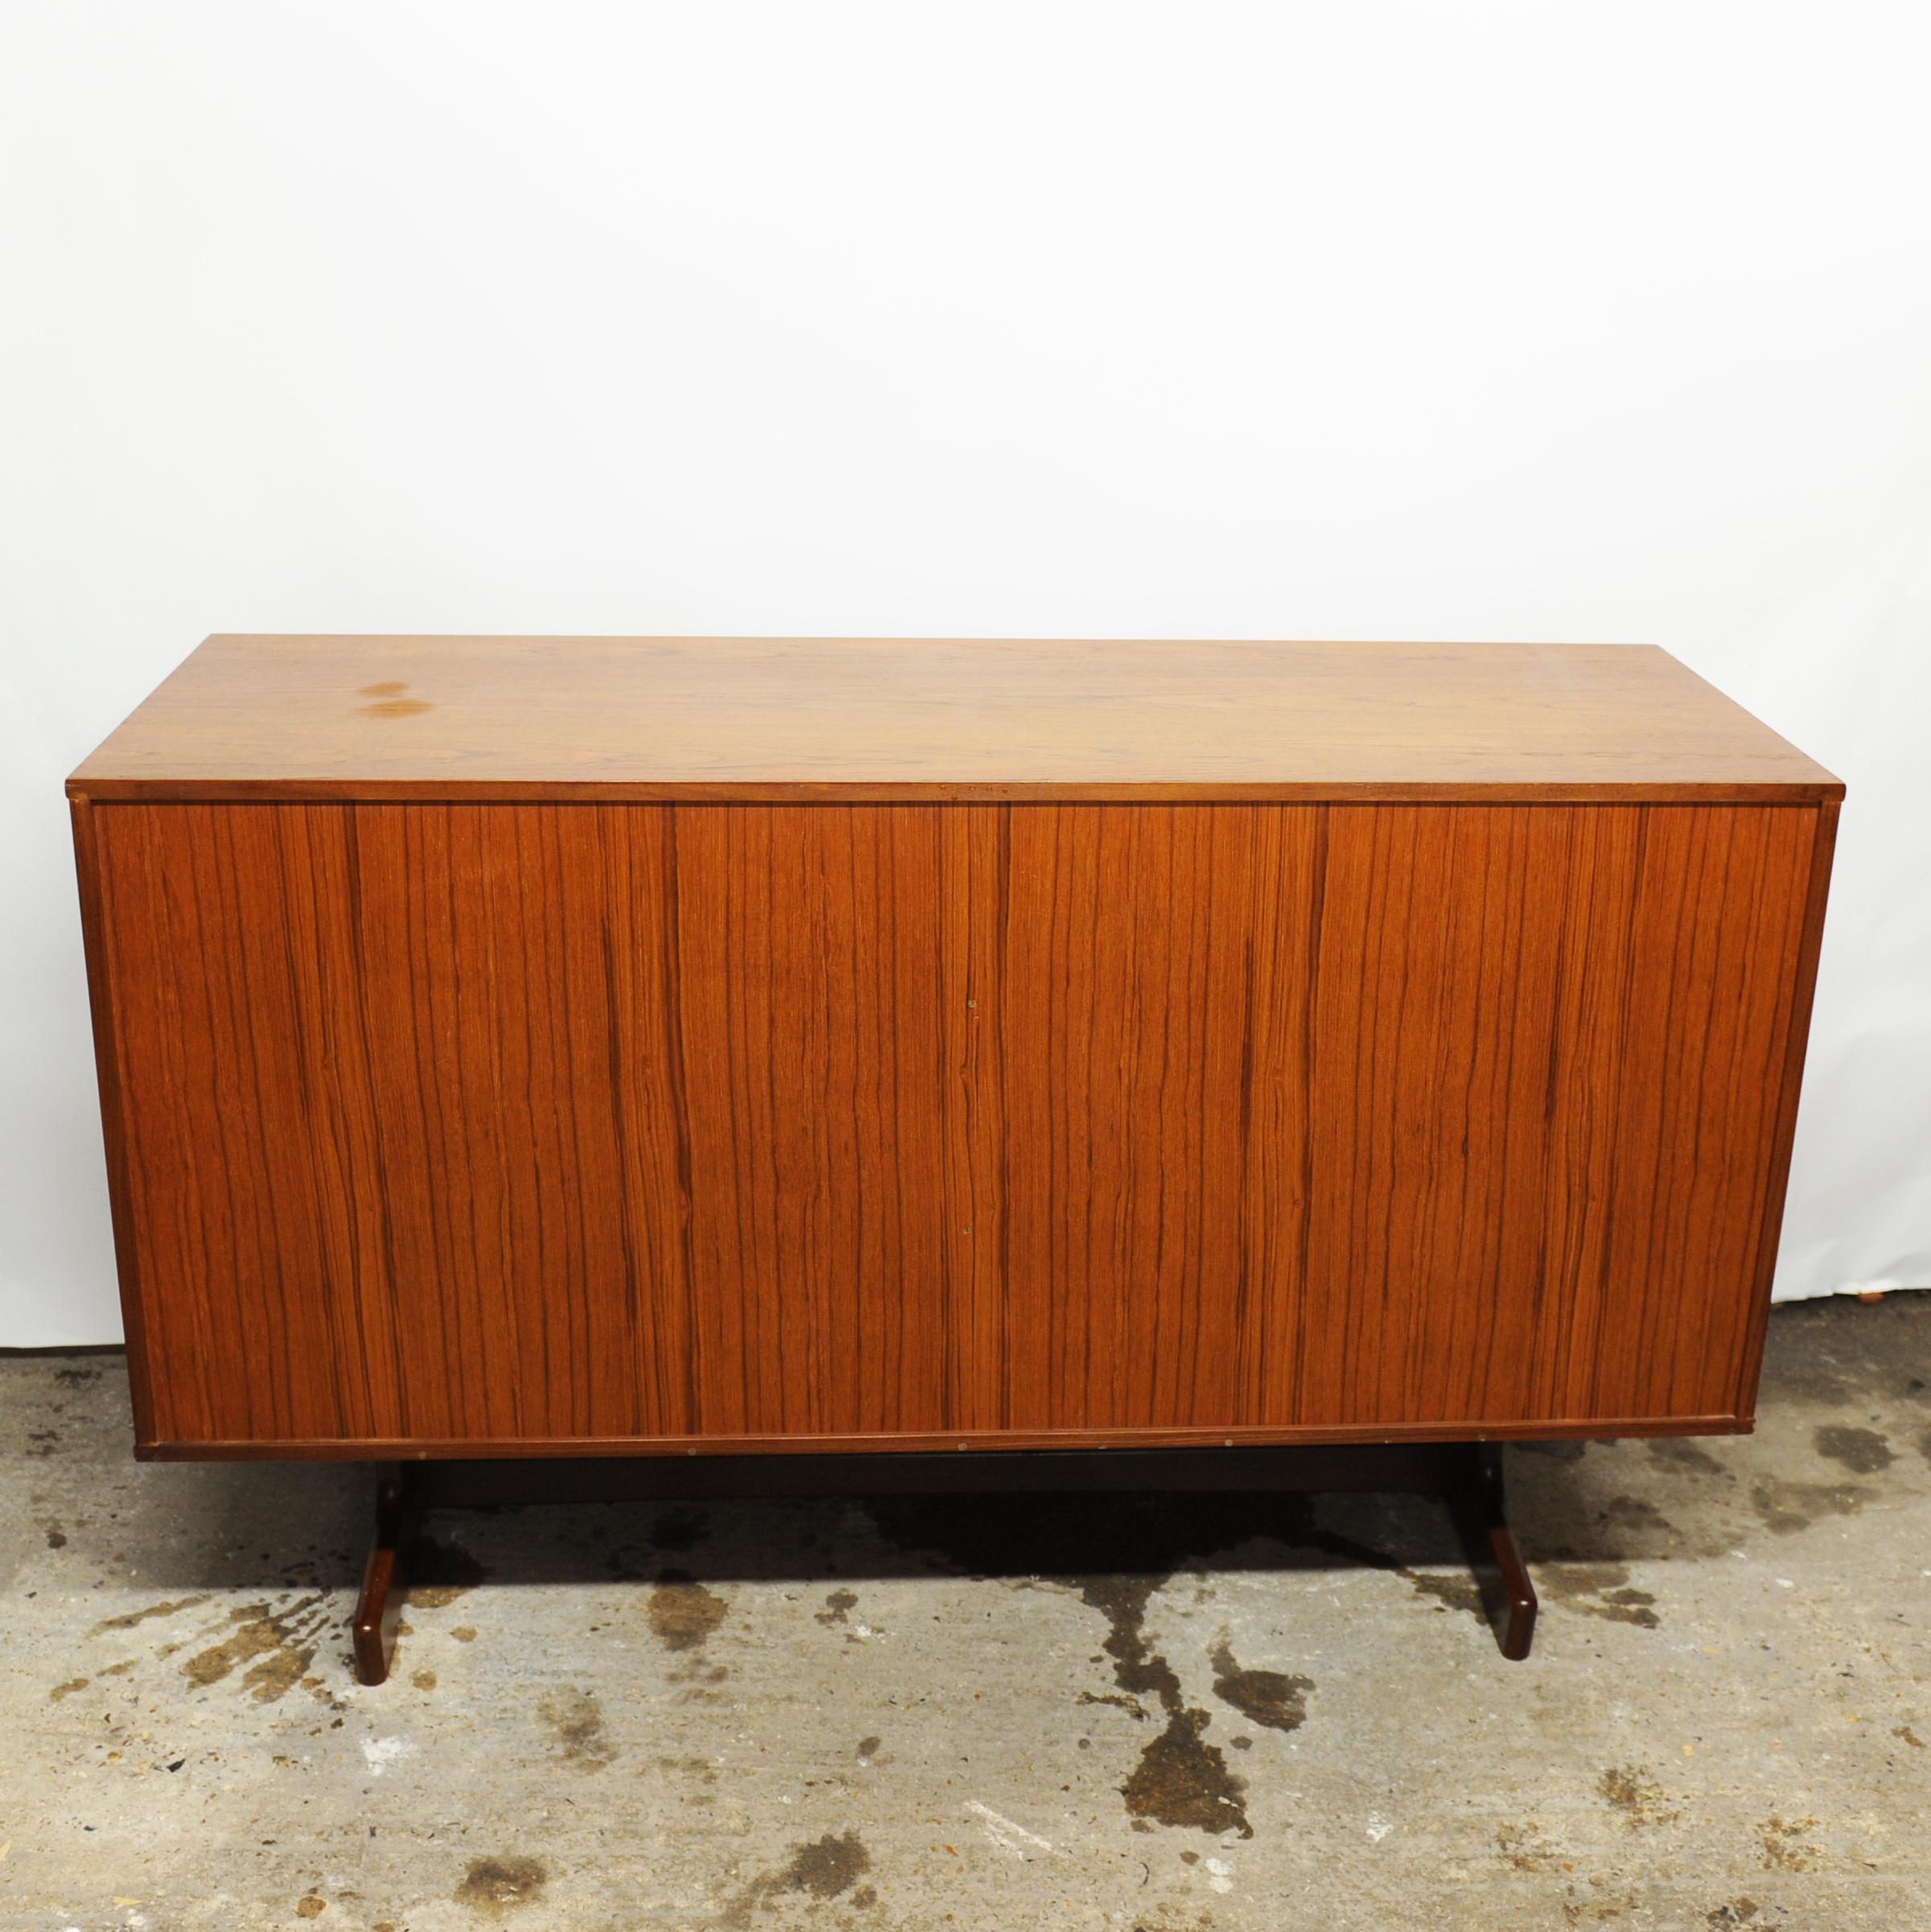 A vintage teak sliding door sideboard with inner shelves.

Manufacturer - Unknown

Design Period - 1970 to 1979

Country of Manufacture - U.K

Style - Mid-Century, Vintage

Detailed Condition - Good with minimal defects

Restoration and Damage